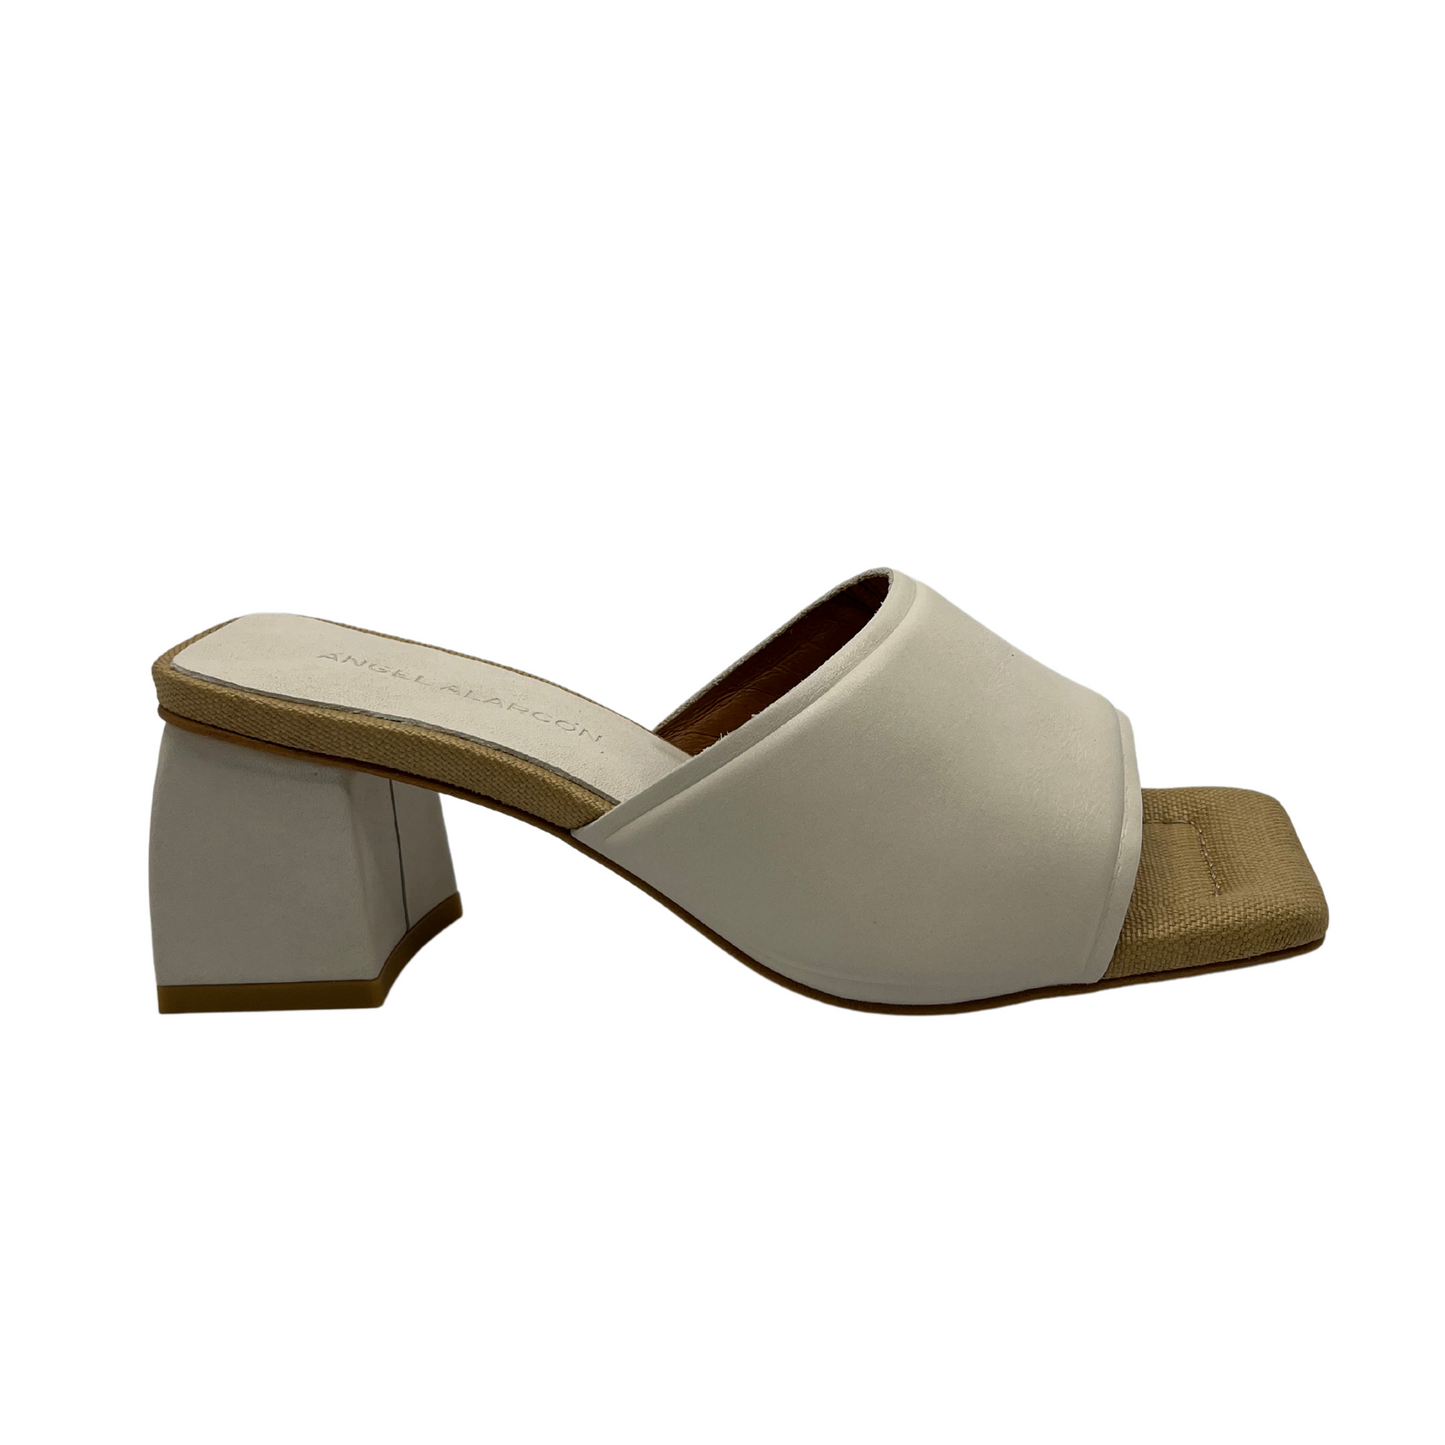 Right facing view of cream coloured leather slip on sandal with square toe, wrapped block heel and padded insole